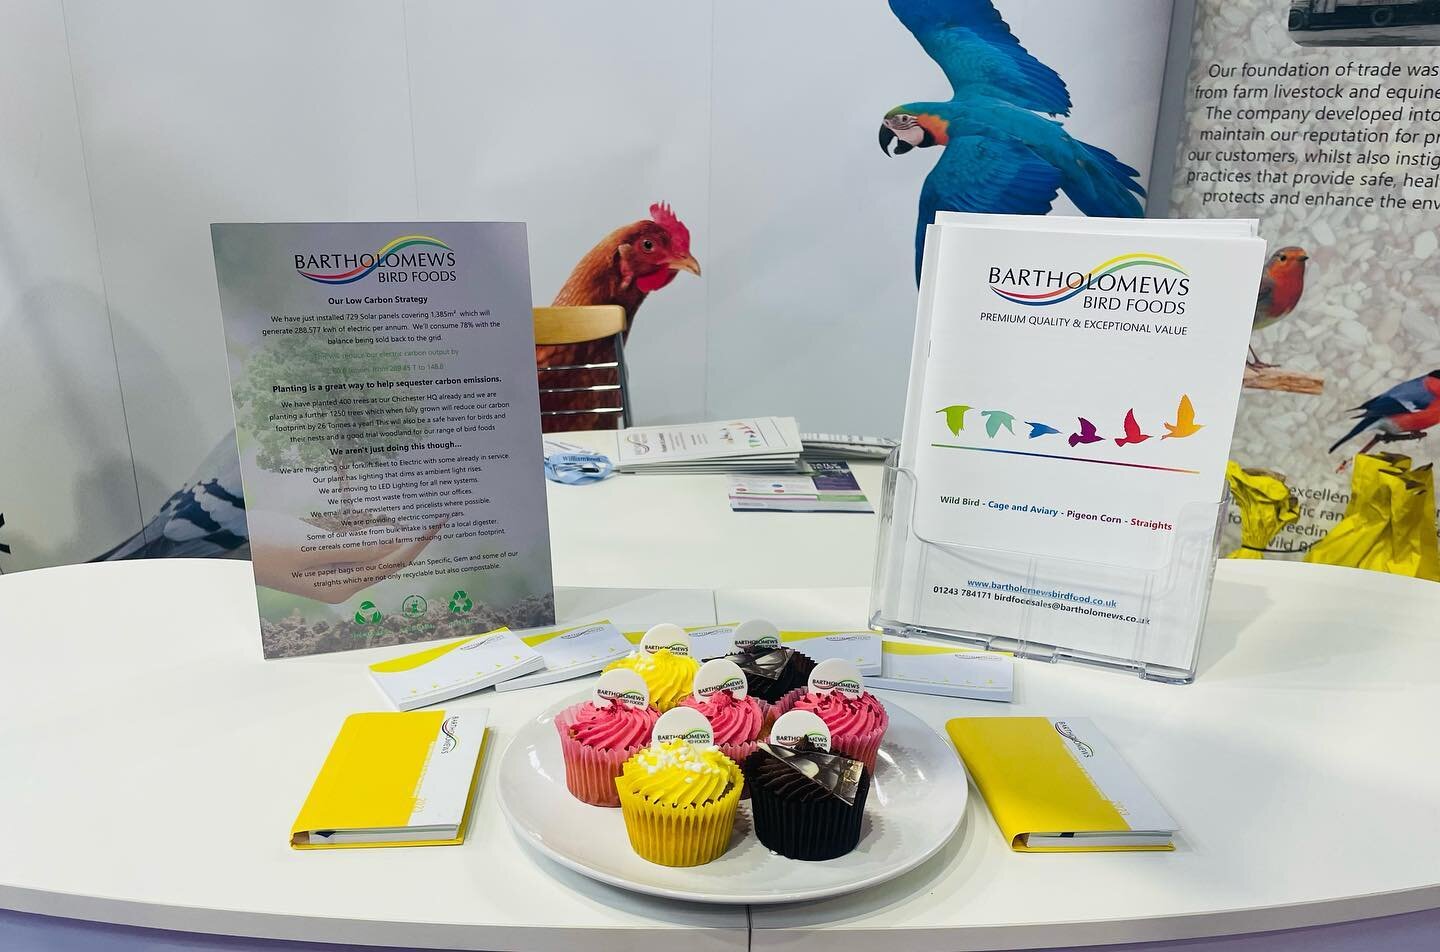 The Farm Shop and Deli Show is now open! Come and visit Dwayne and Mark on stand H319 and grab a cupcake!! #farmanddelishow #tradeshow  #bartsbirdfood #cupcakes #fsd2023